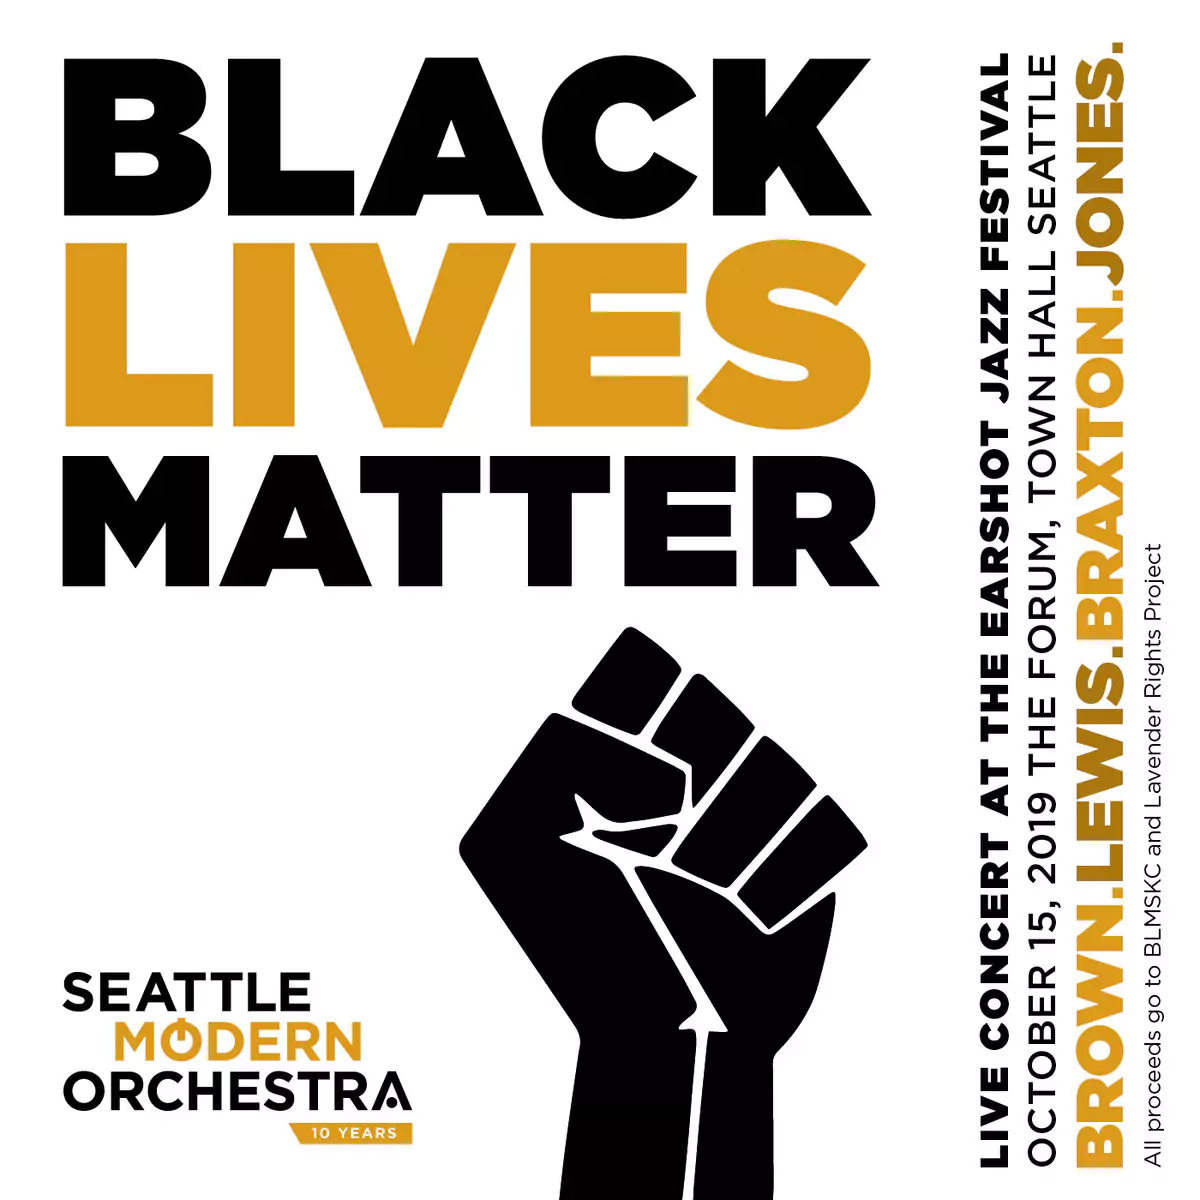 album art for the Seattle Modern Orchestra recording of their Black Lives Matter concert, recorded live at the Earshot Jazz Festival